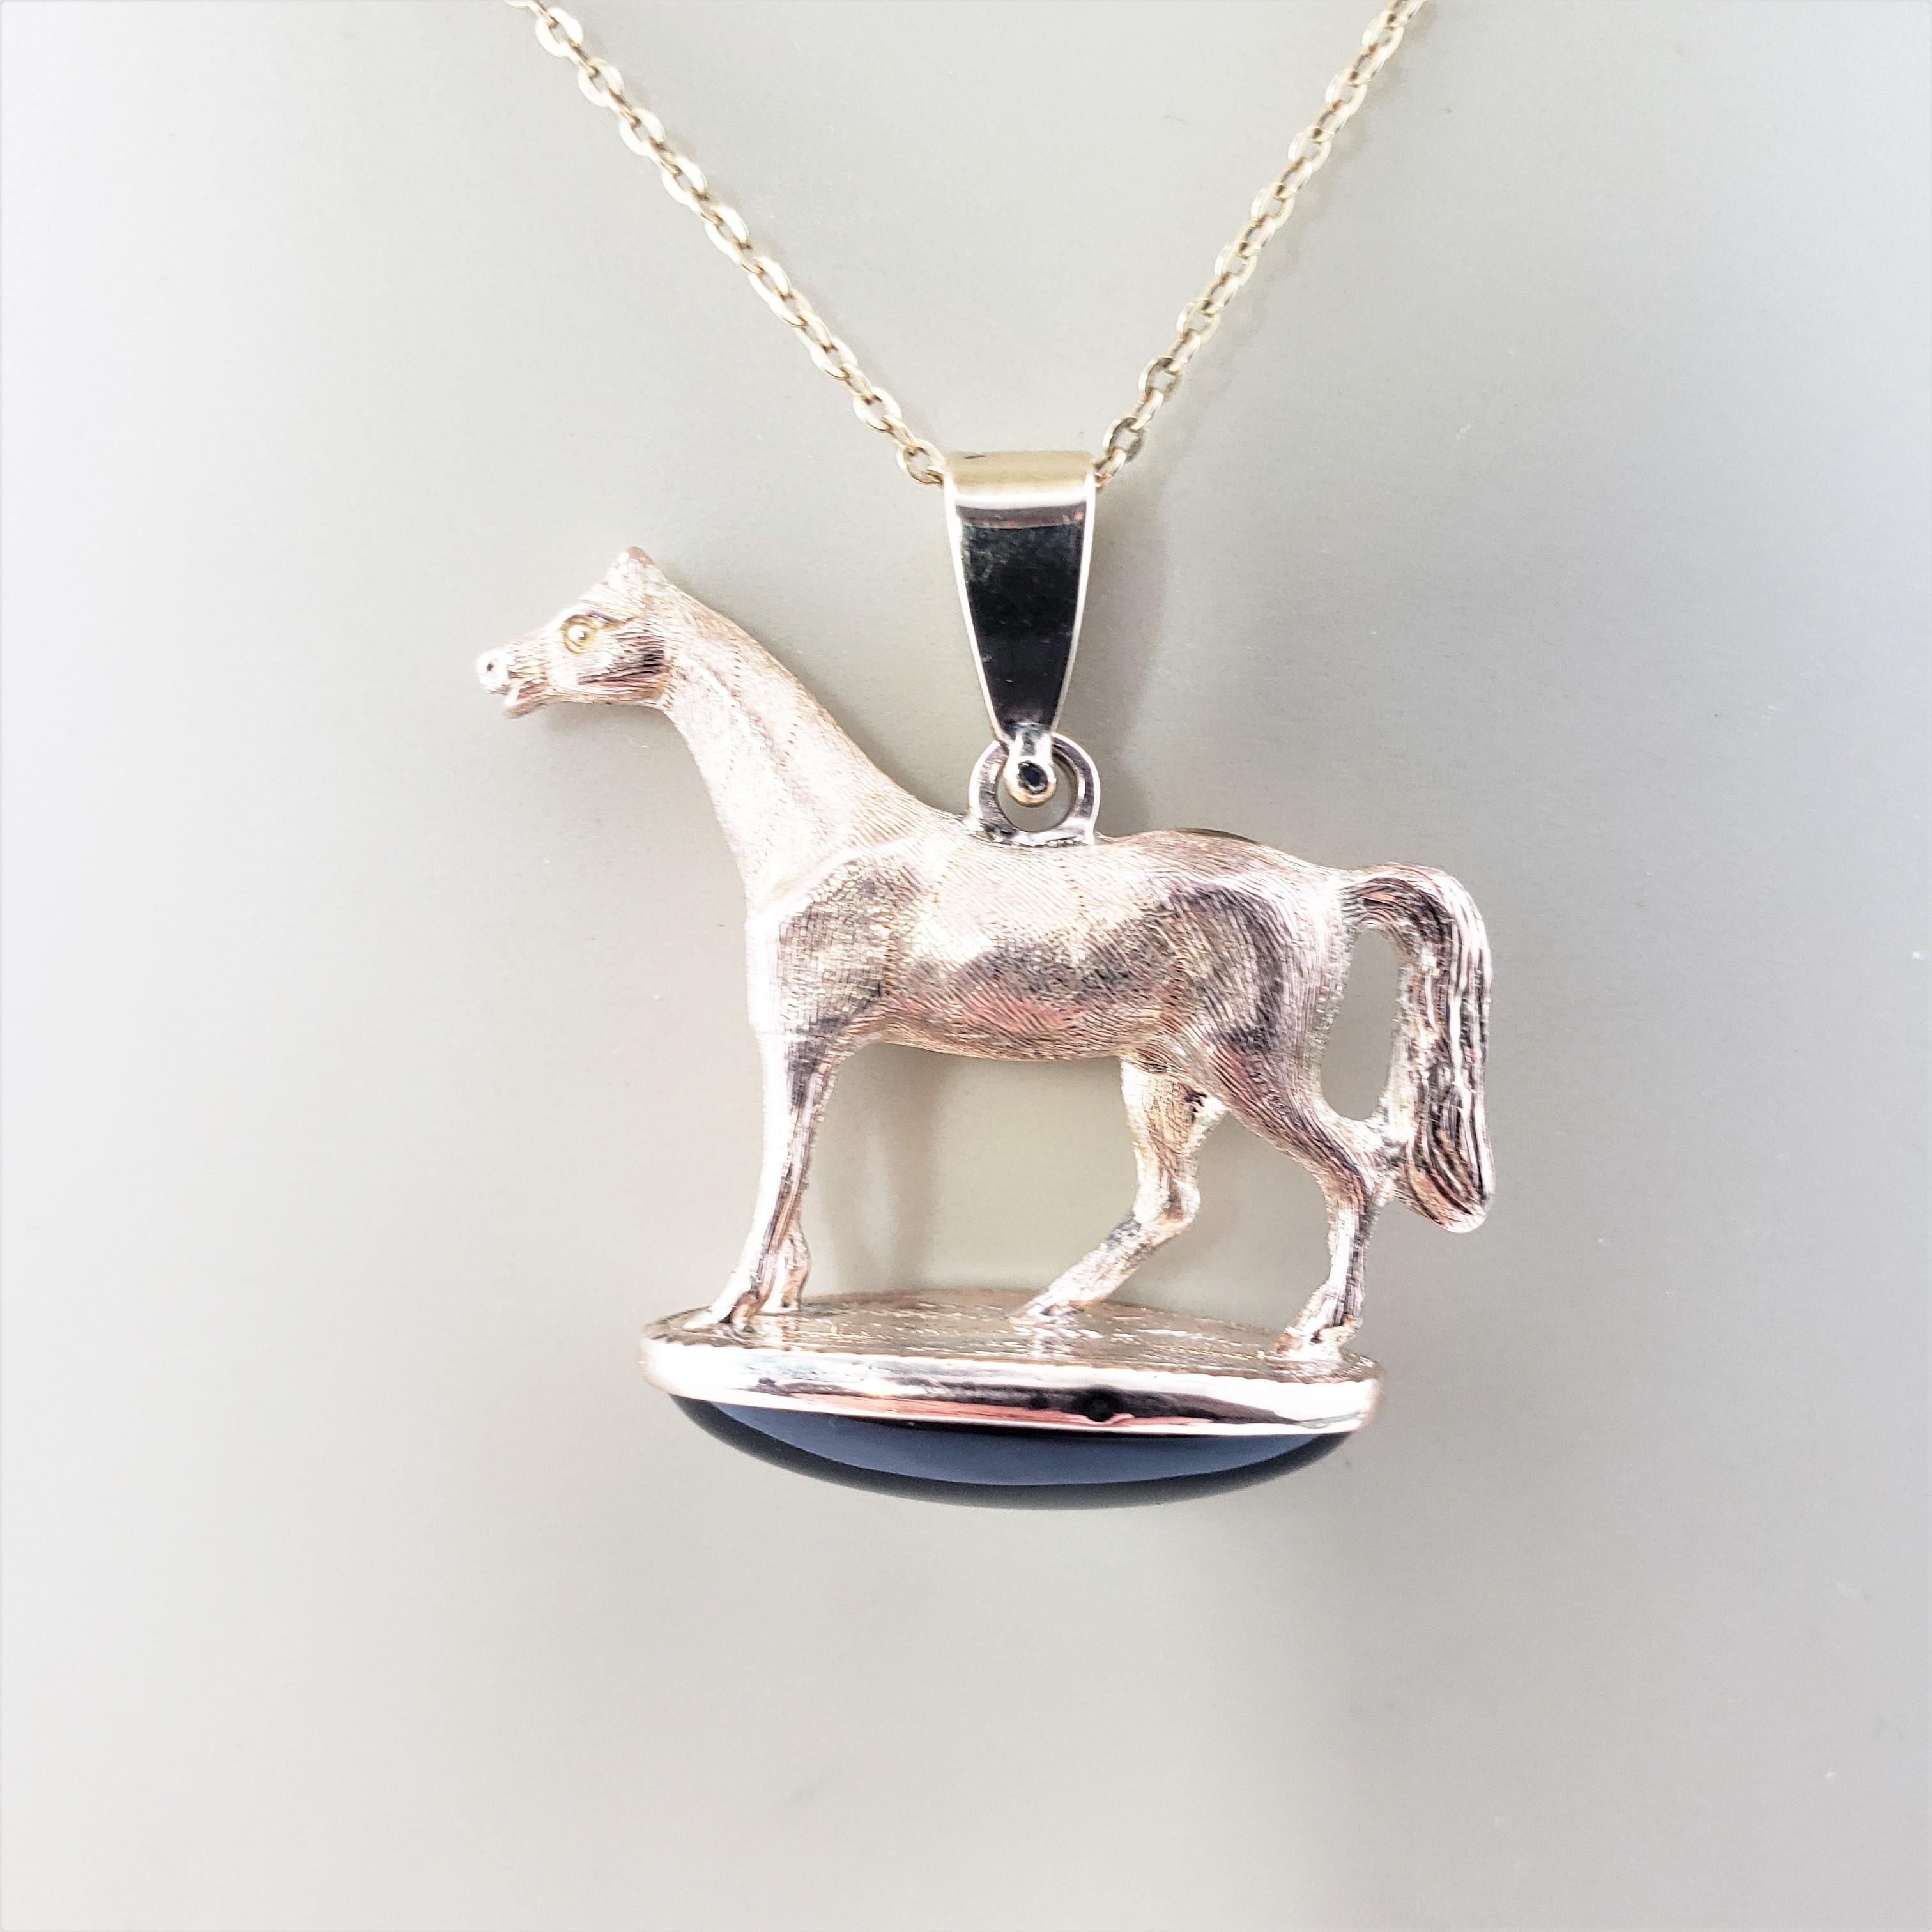 14 Karat Yellow Gold and Onyx Horse Pendant For Sale 2